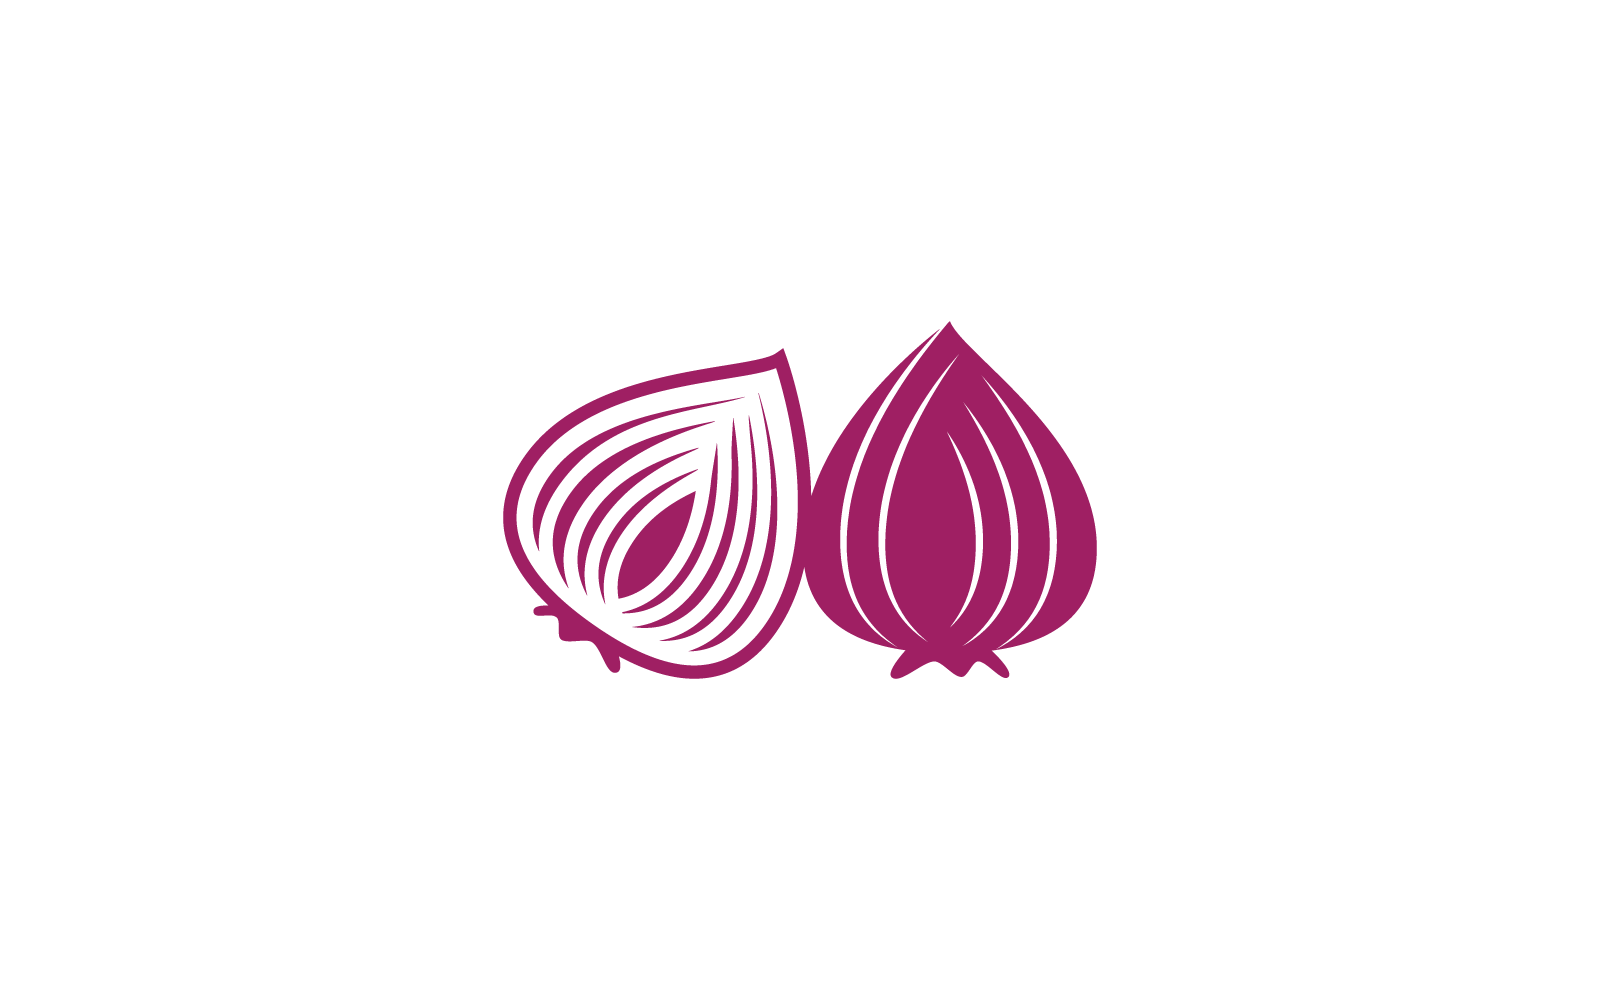 Onion on white background vector icon flat design